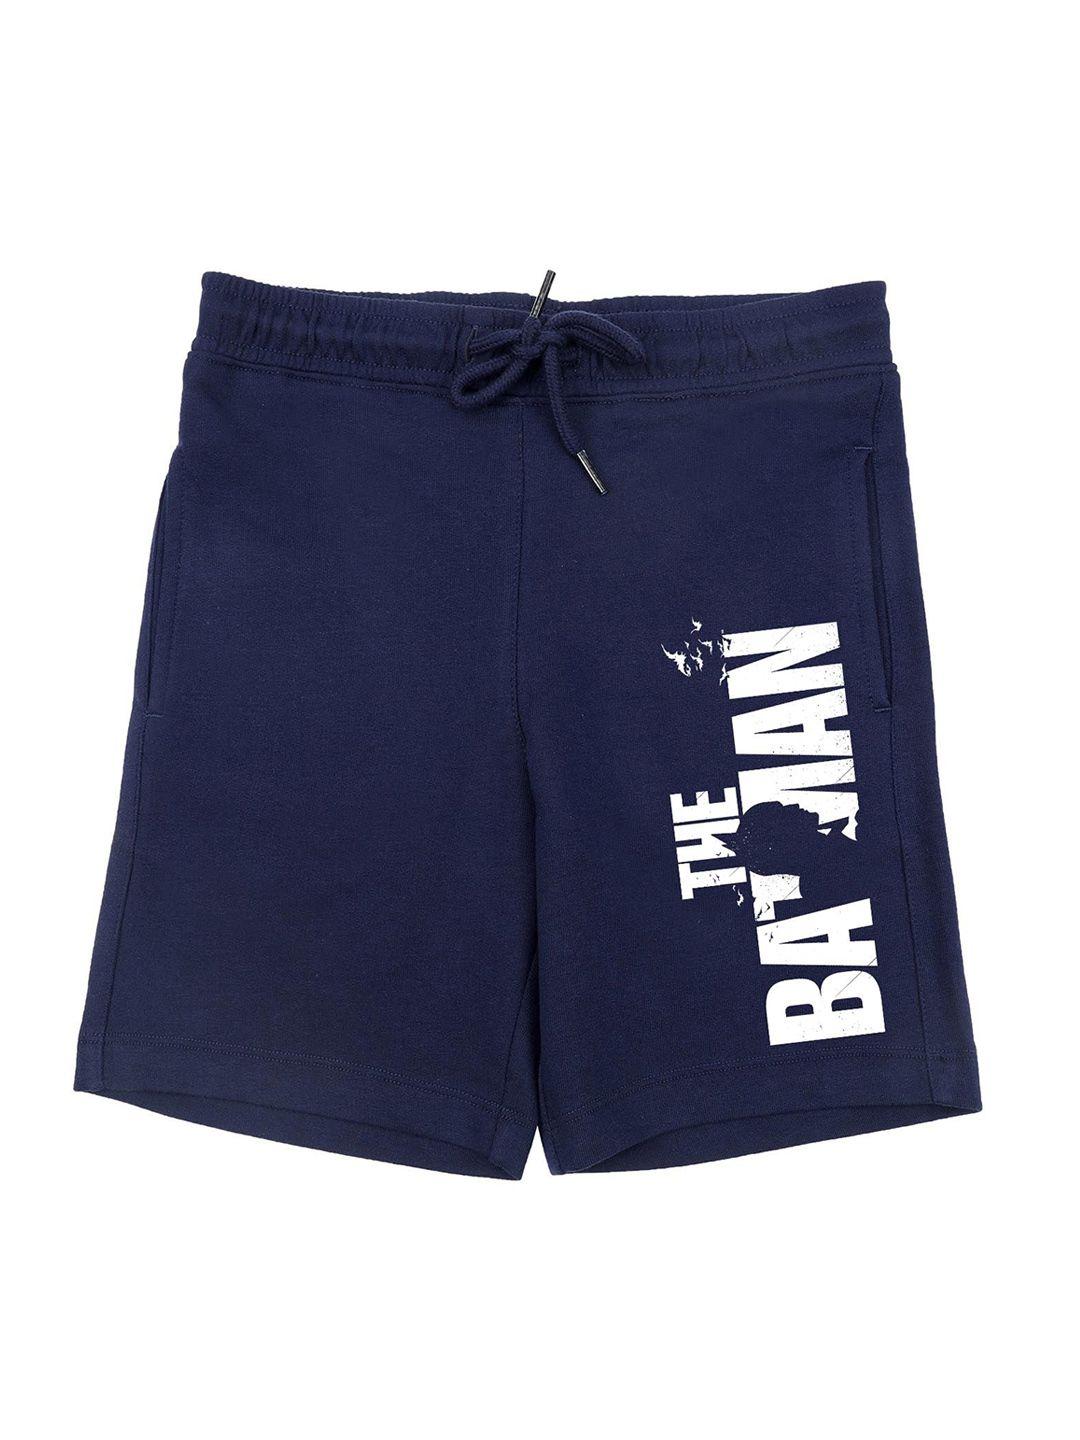 dc by wear your mind boys navy blue & white printed shorts